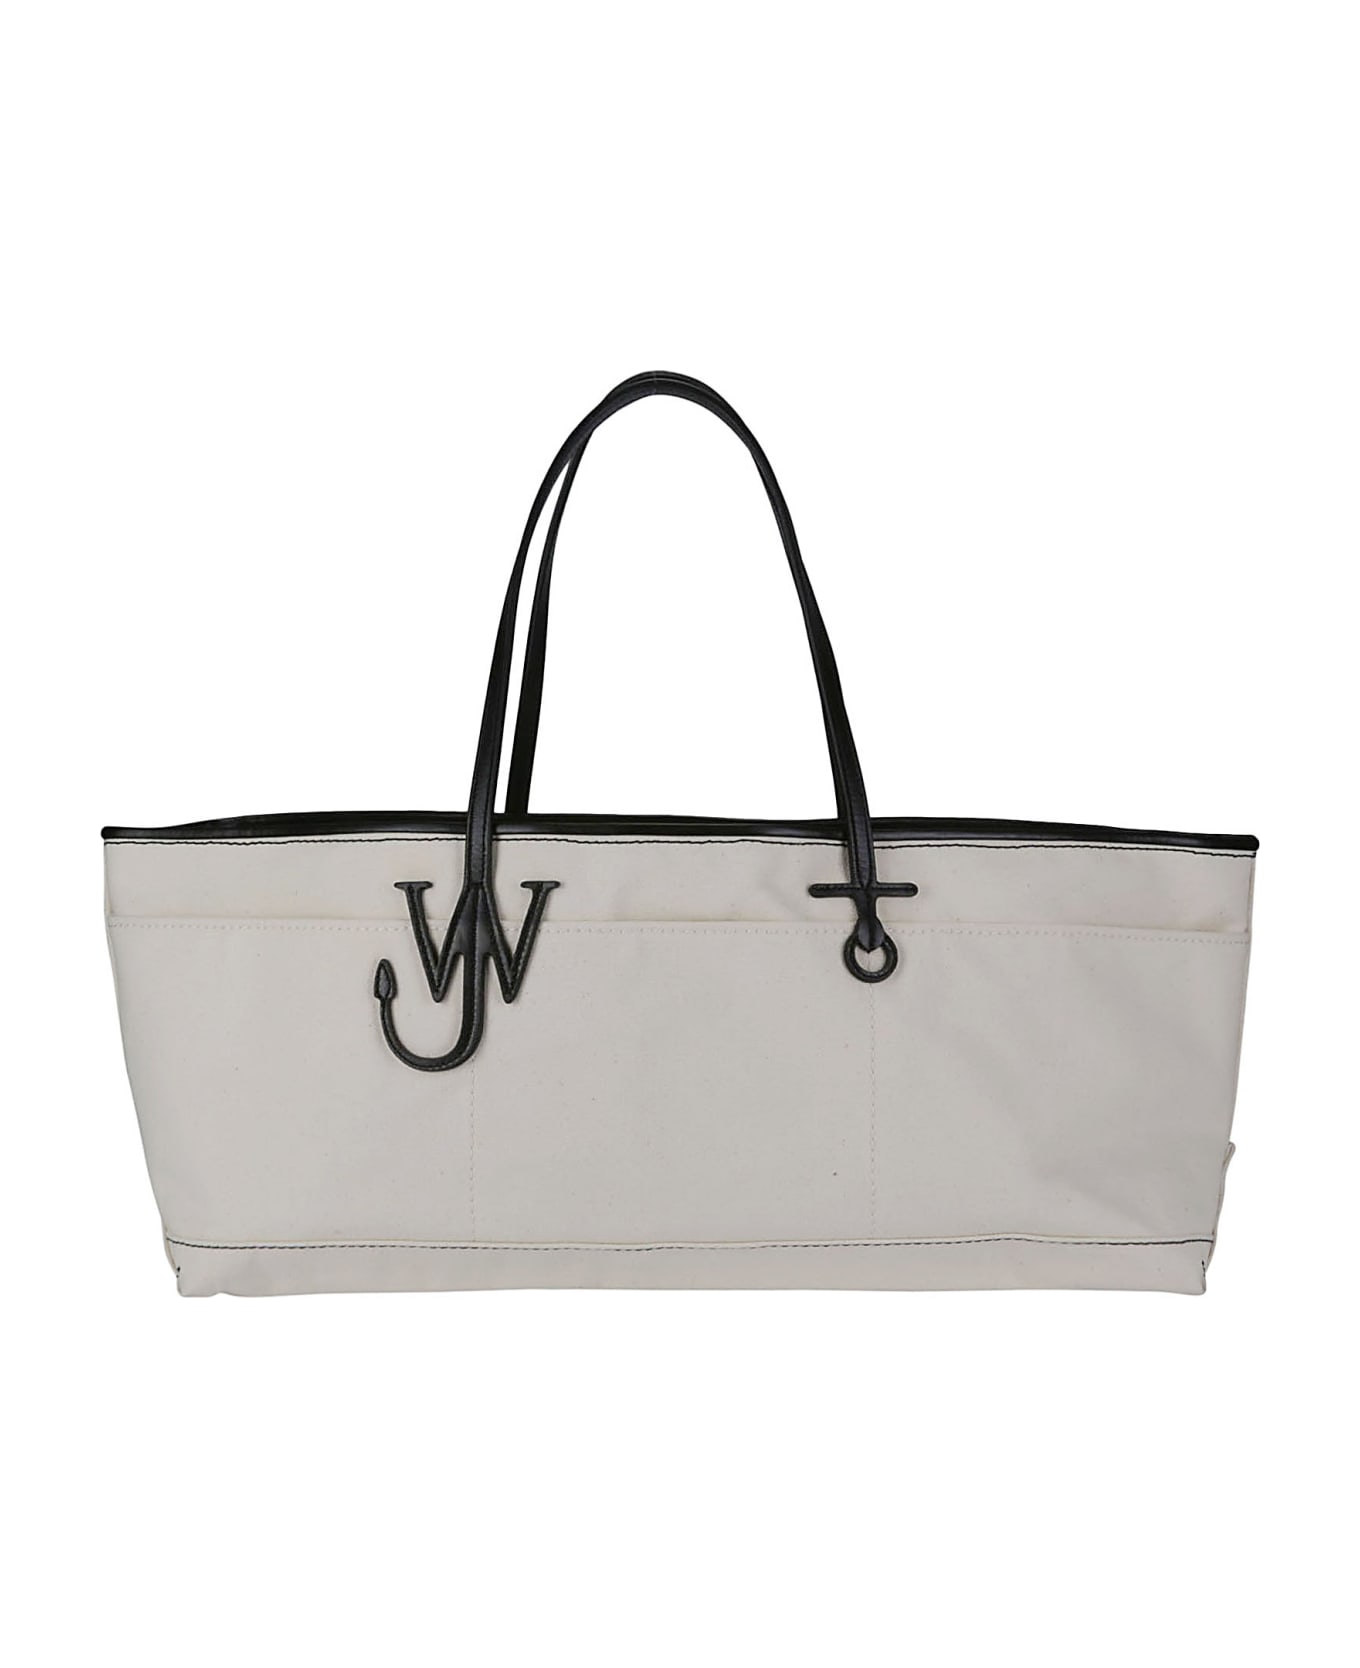 J.W. Anderson Anchor Stretch Tote - NATURAL/BLACK